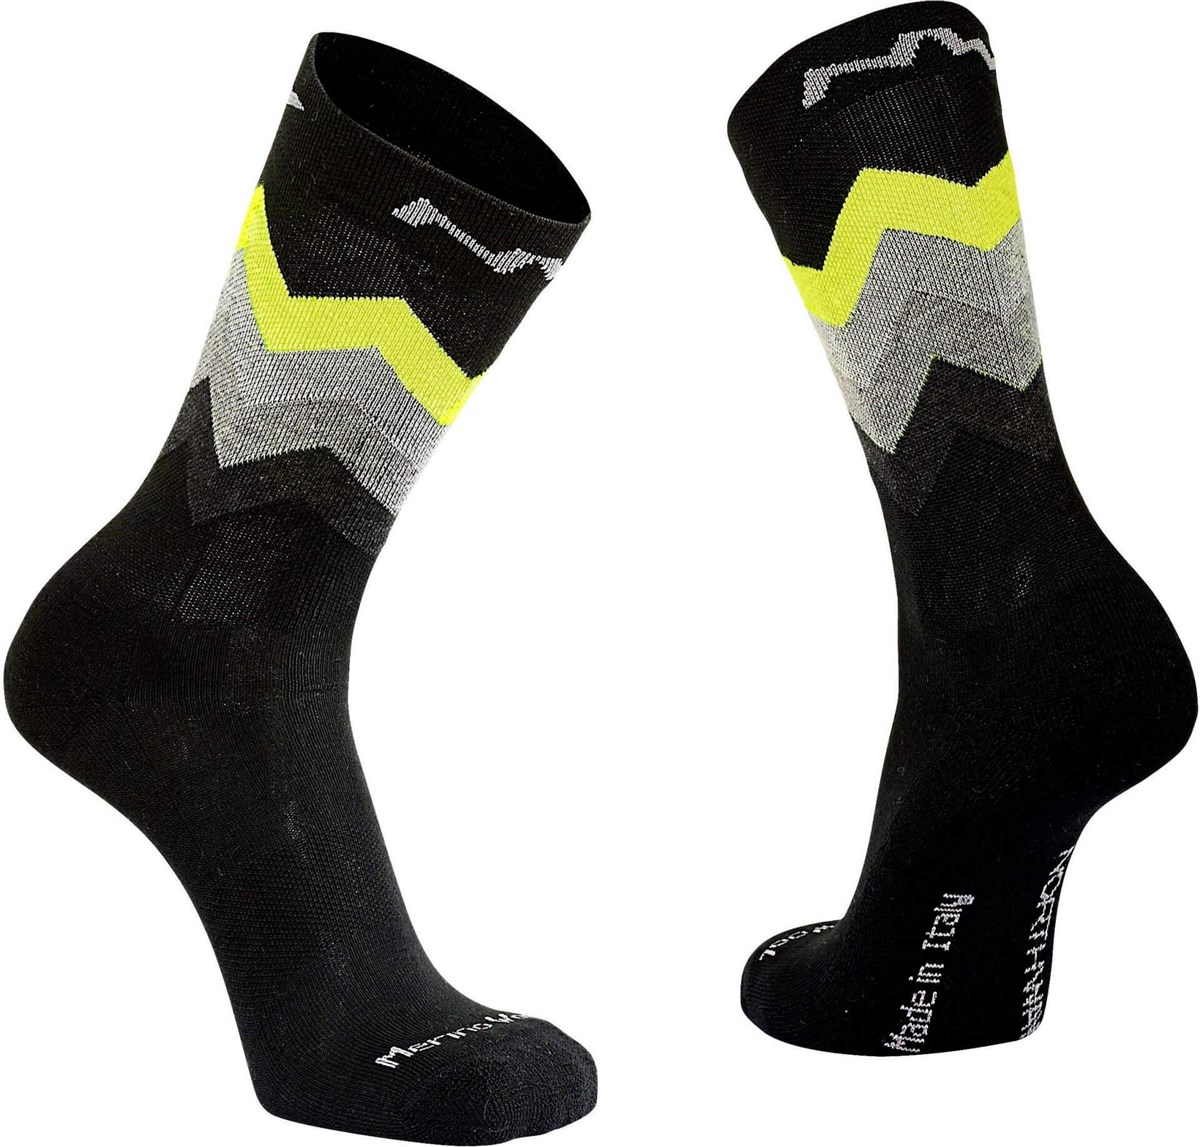 Northwave Core High Socks product image